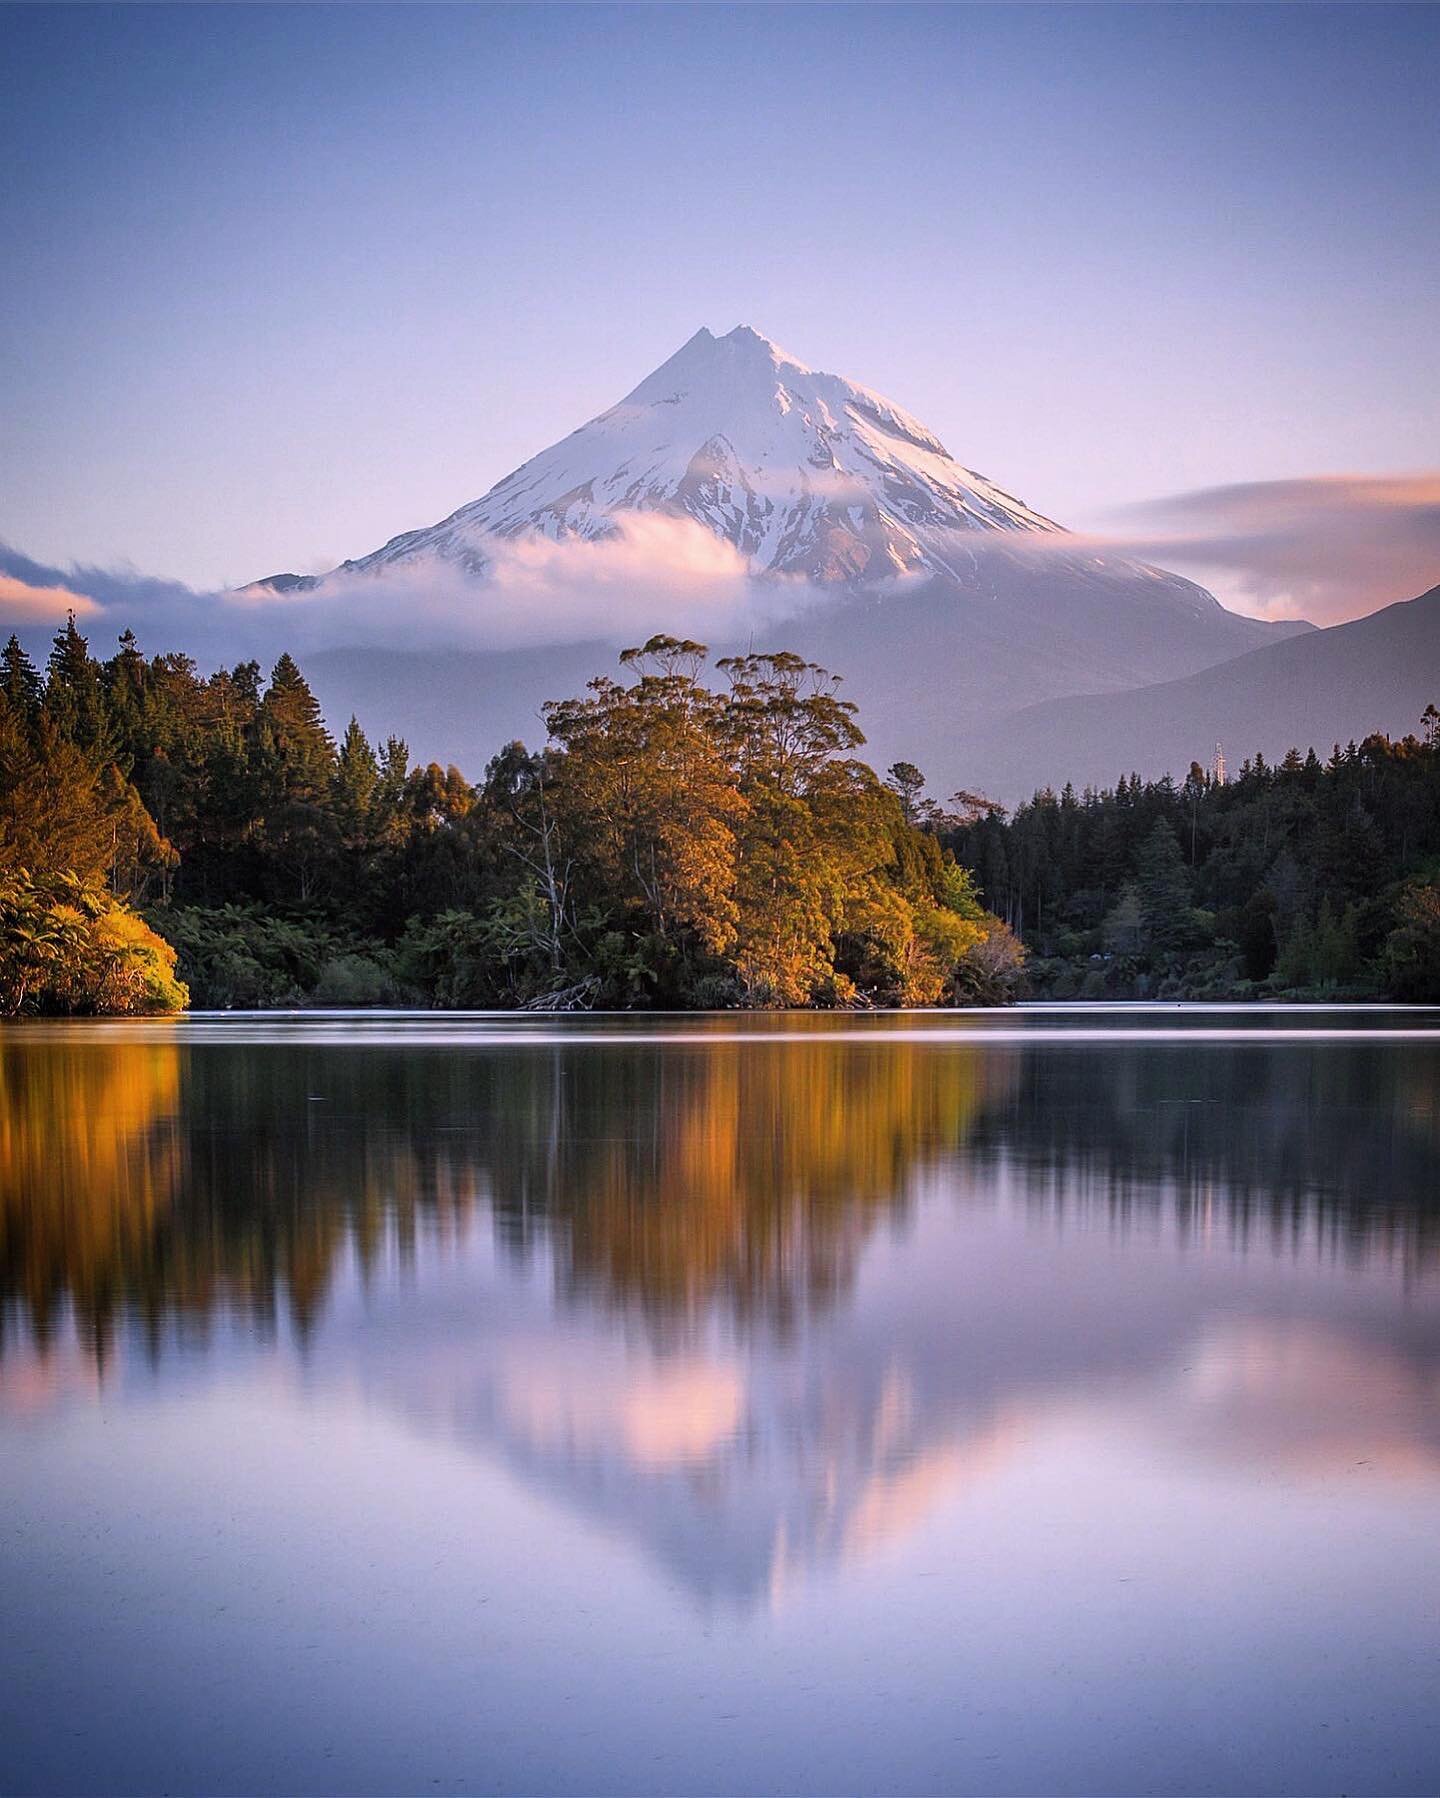 New Blog Post! 🏔️

Lake Mangamahoe is one of those New Zealand locations that has it all. A perfect view of Mount Taranaki, a beautiful lake, surrounded by forest .. easily accessible and only a short distance walk to all the best photo spots. 

My 